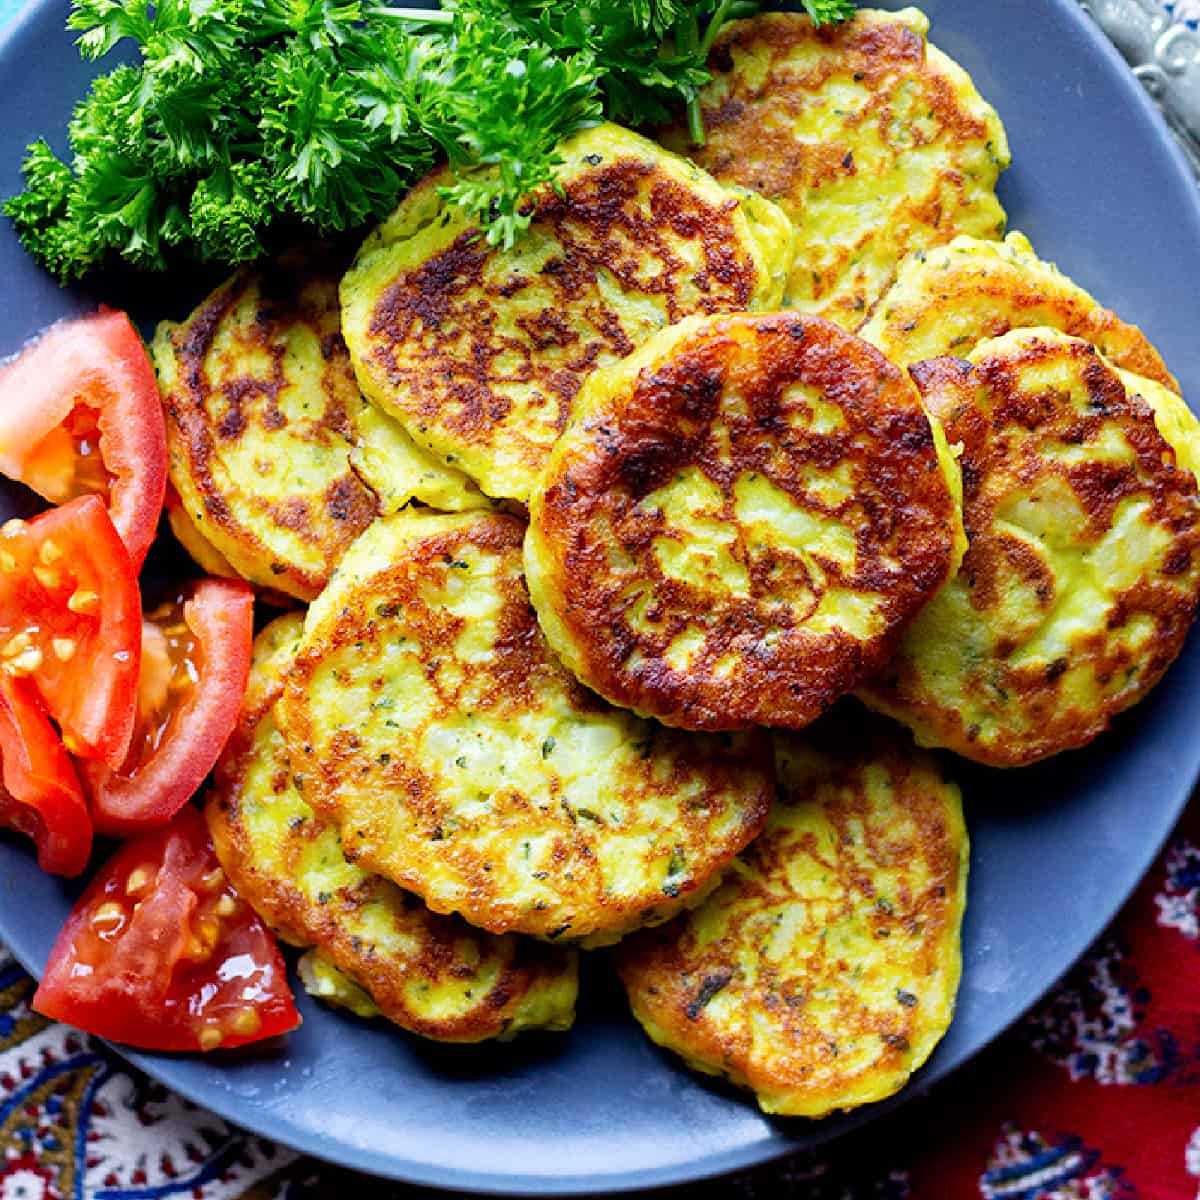 These potato patties are crispy on the outside and creamy and soft on the inside. Serve these homemade potato patties as an appetizer or a light meal. 
